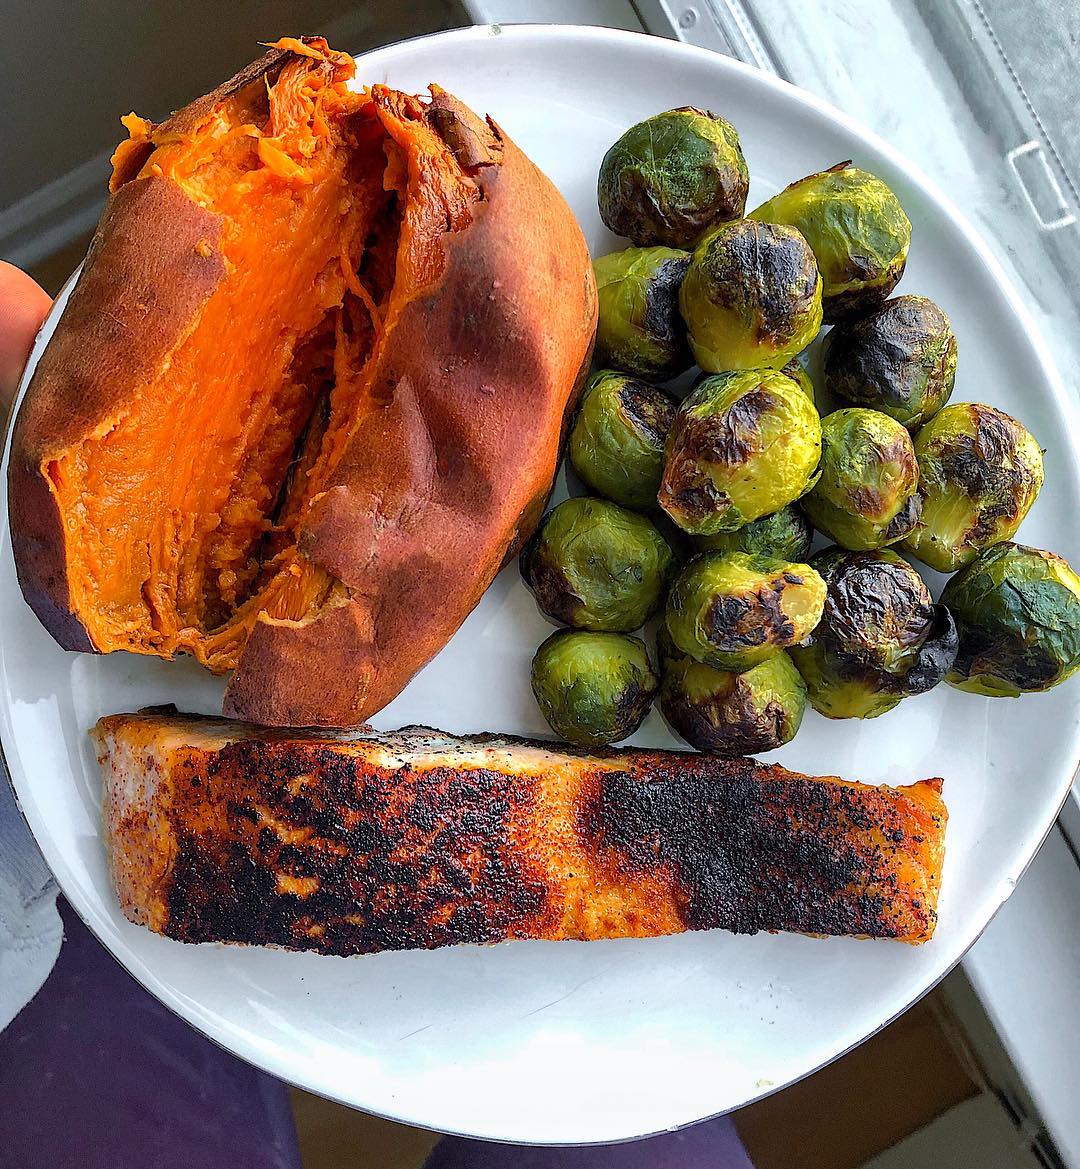 Salmon, Baked Sweet Potato, and Crispy Brussels